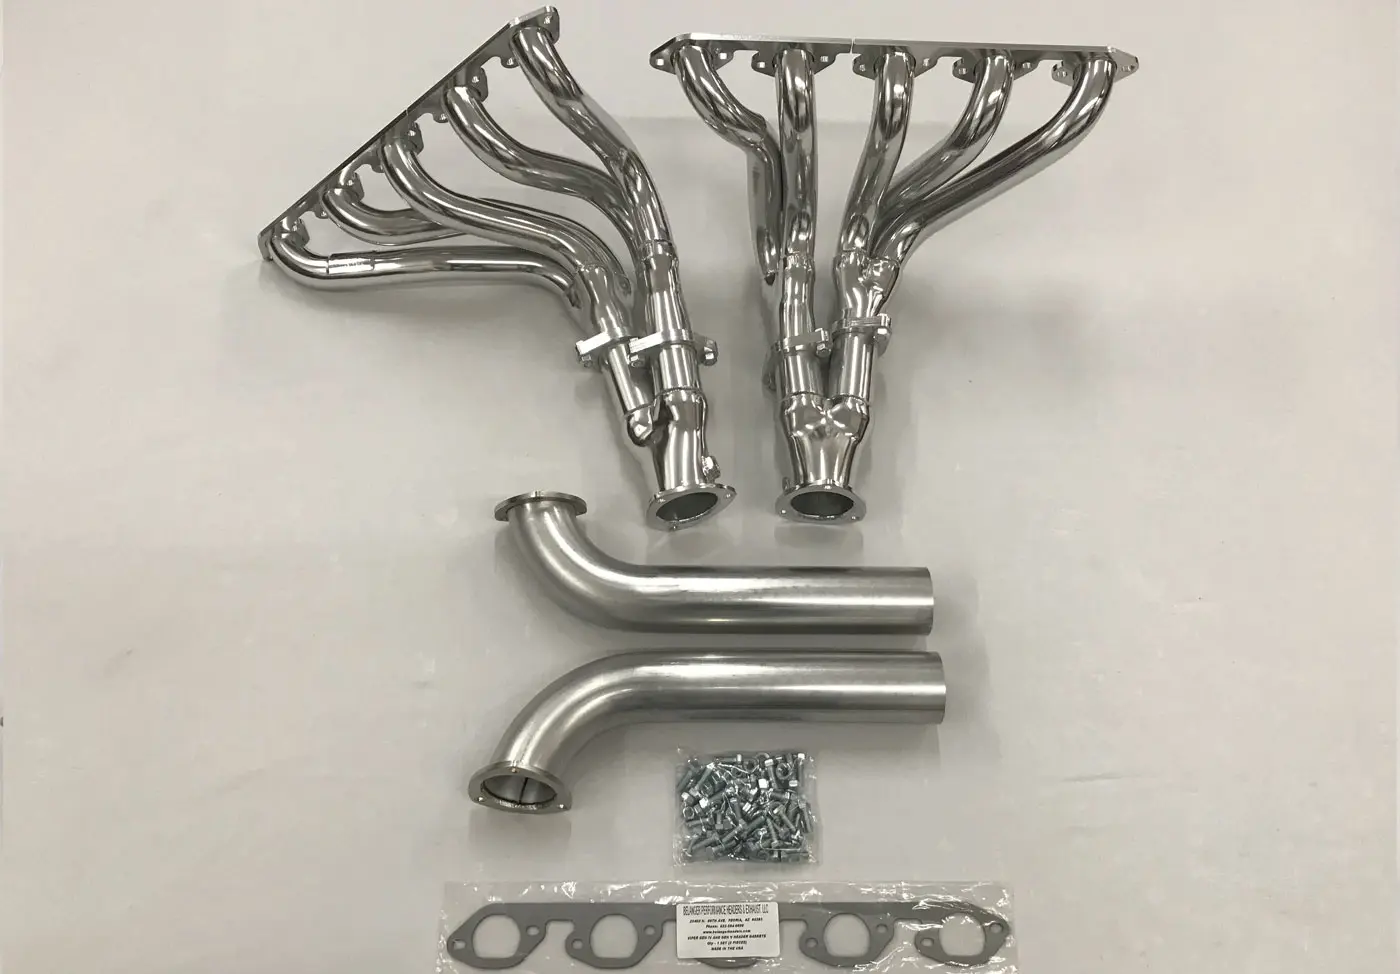 A set of exhaust pipes and hardware for a car.